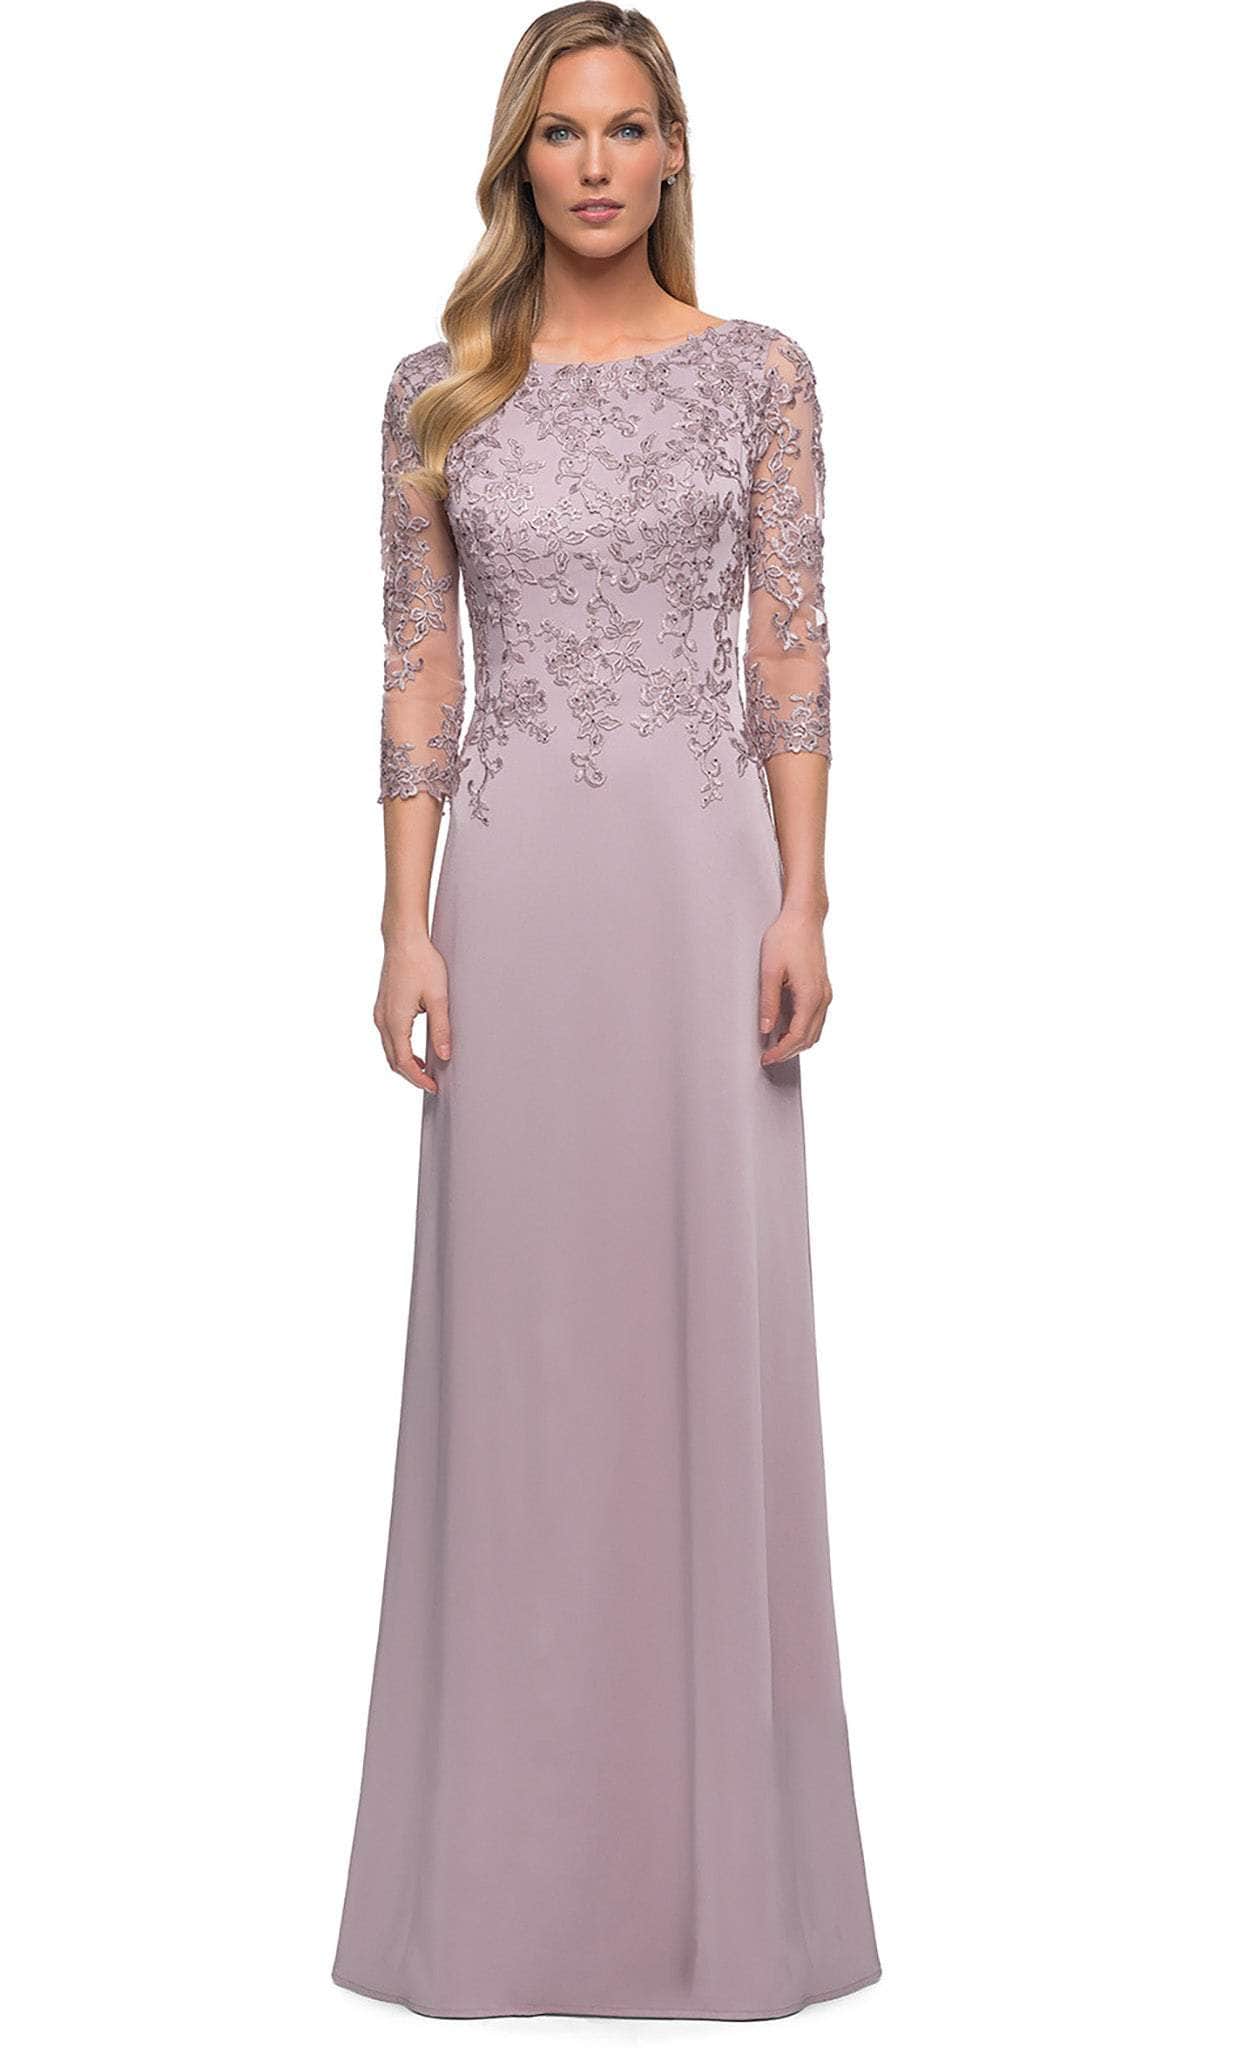 La Femme - 29251 Embroidered Soft Look A-line Gown Mother of the Bride Dresses 2 / Light Mauve